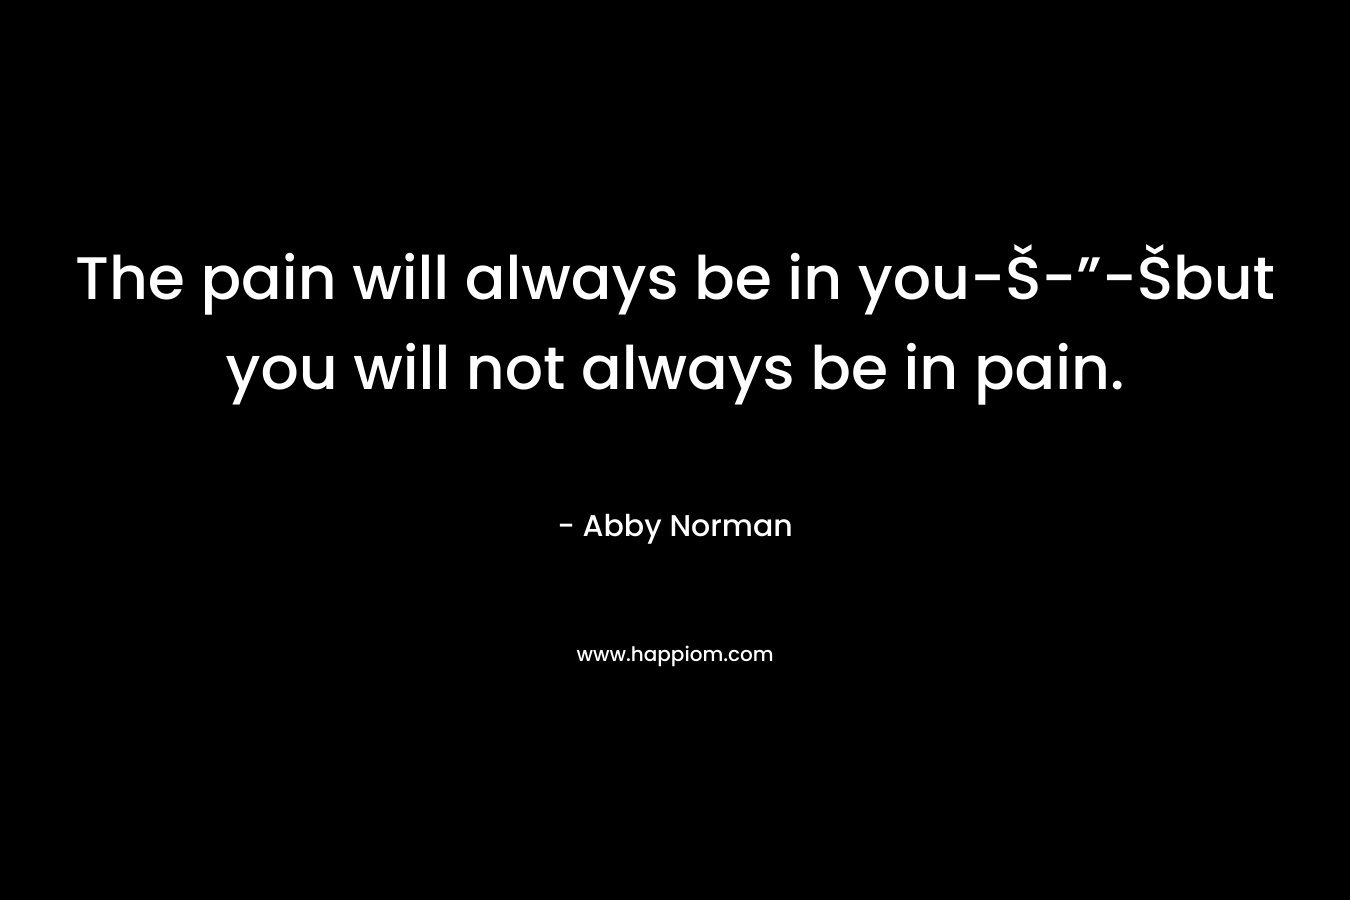 The pain will always be in you-Š-”-Šbut you will not always be in pain. – Abby Norman